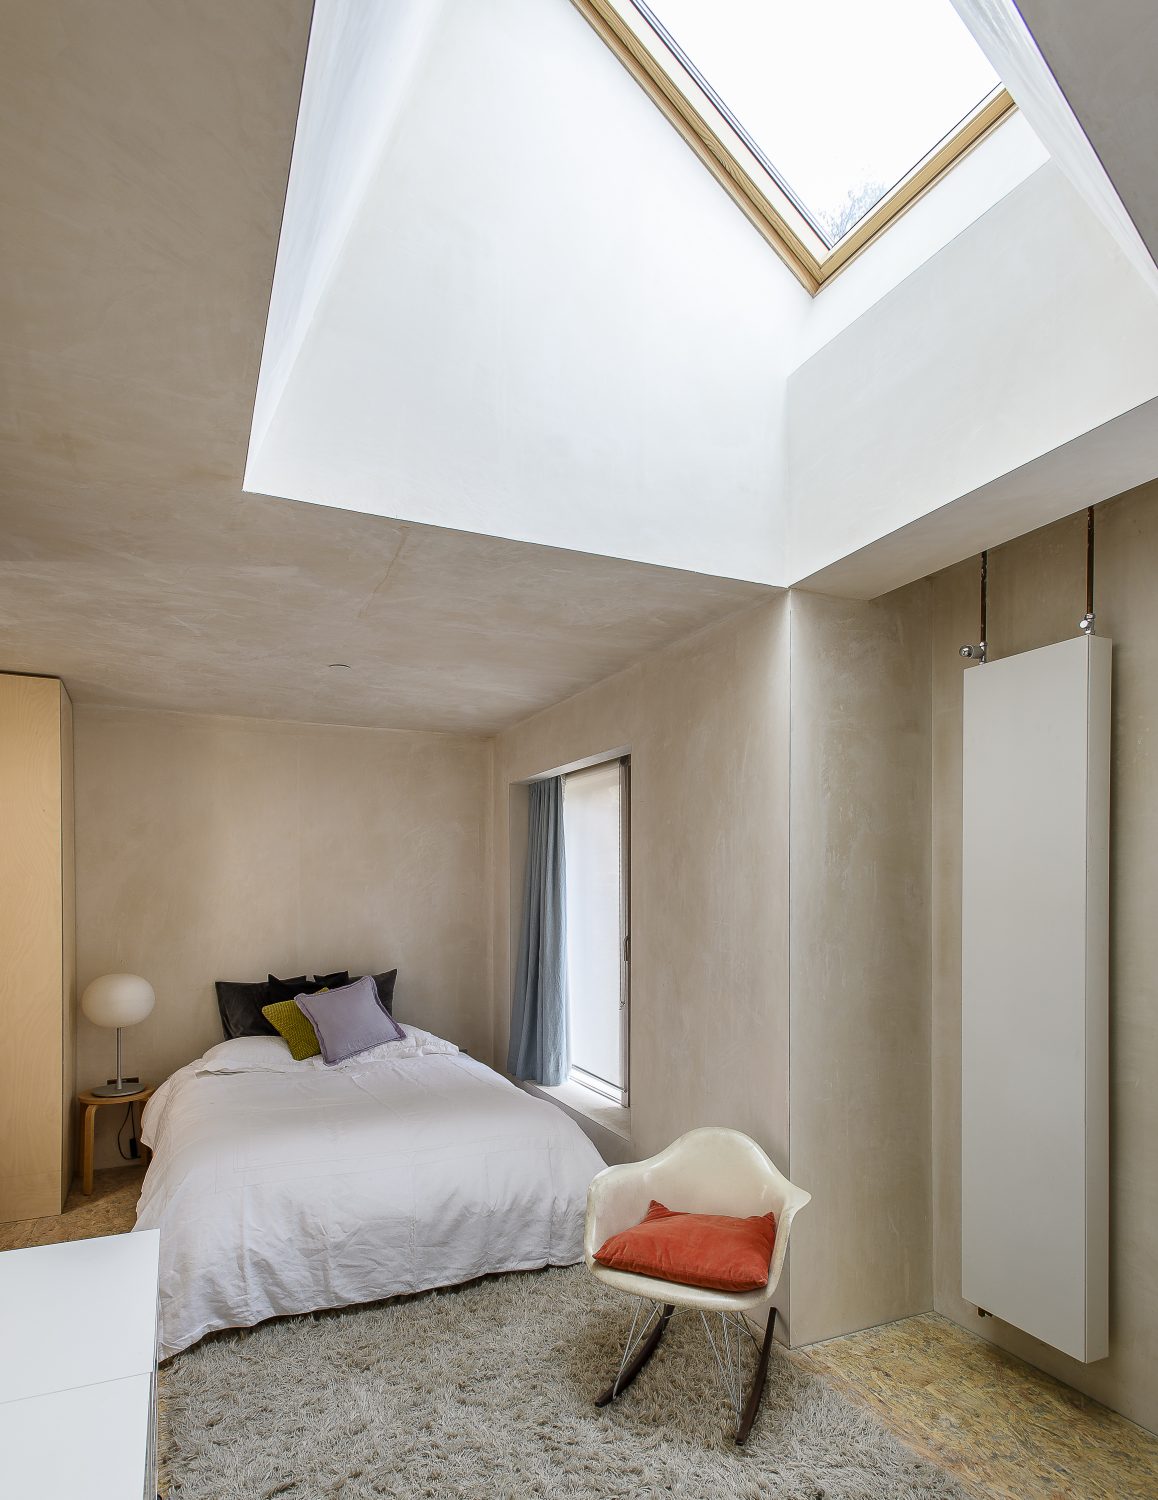 In the bedrooms on this floor plywood is also used to great effect in floor-to-ceiling wardrobe doors.